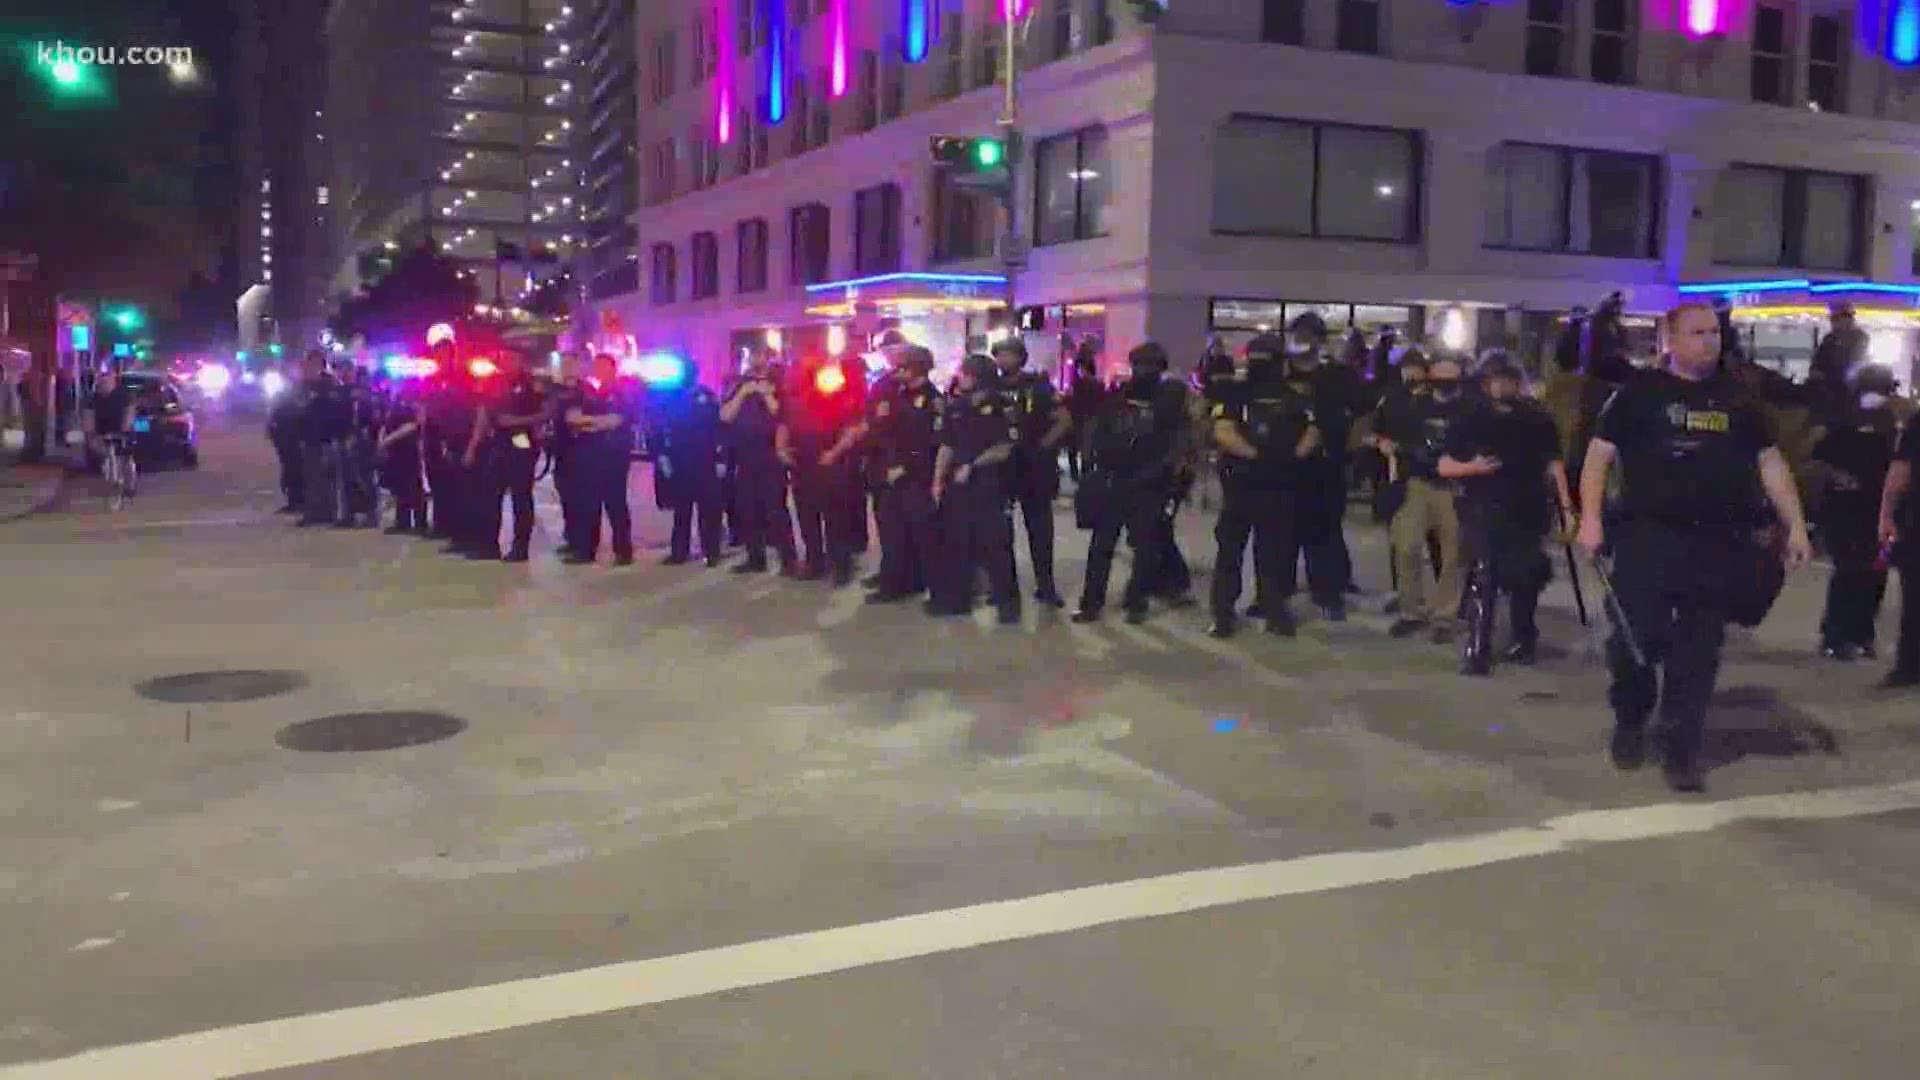 HPD Chief Art Acevedo praised the vast majority of protesters who were peaceful Friday night and blamed outside agitators for inciting violence.